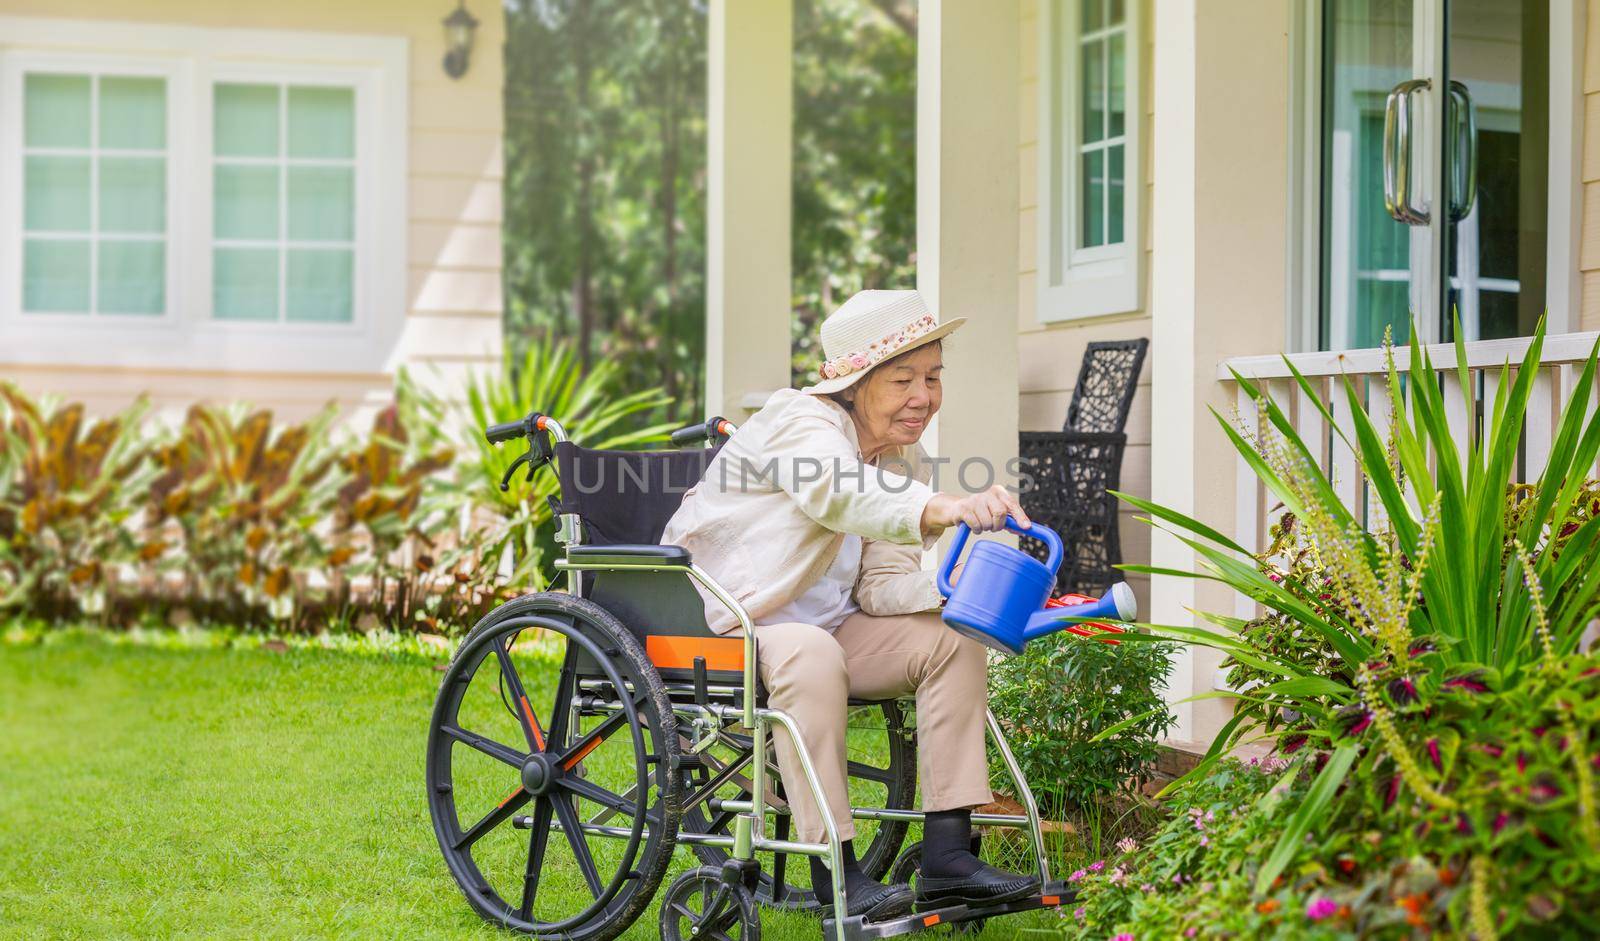 Elderly woman relax with gardening in backyard by toa55